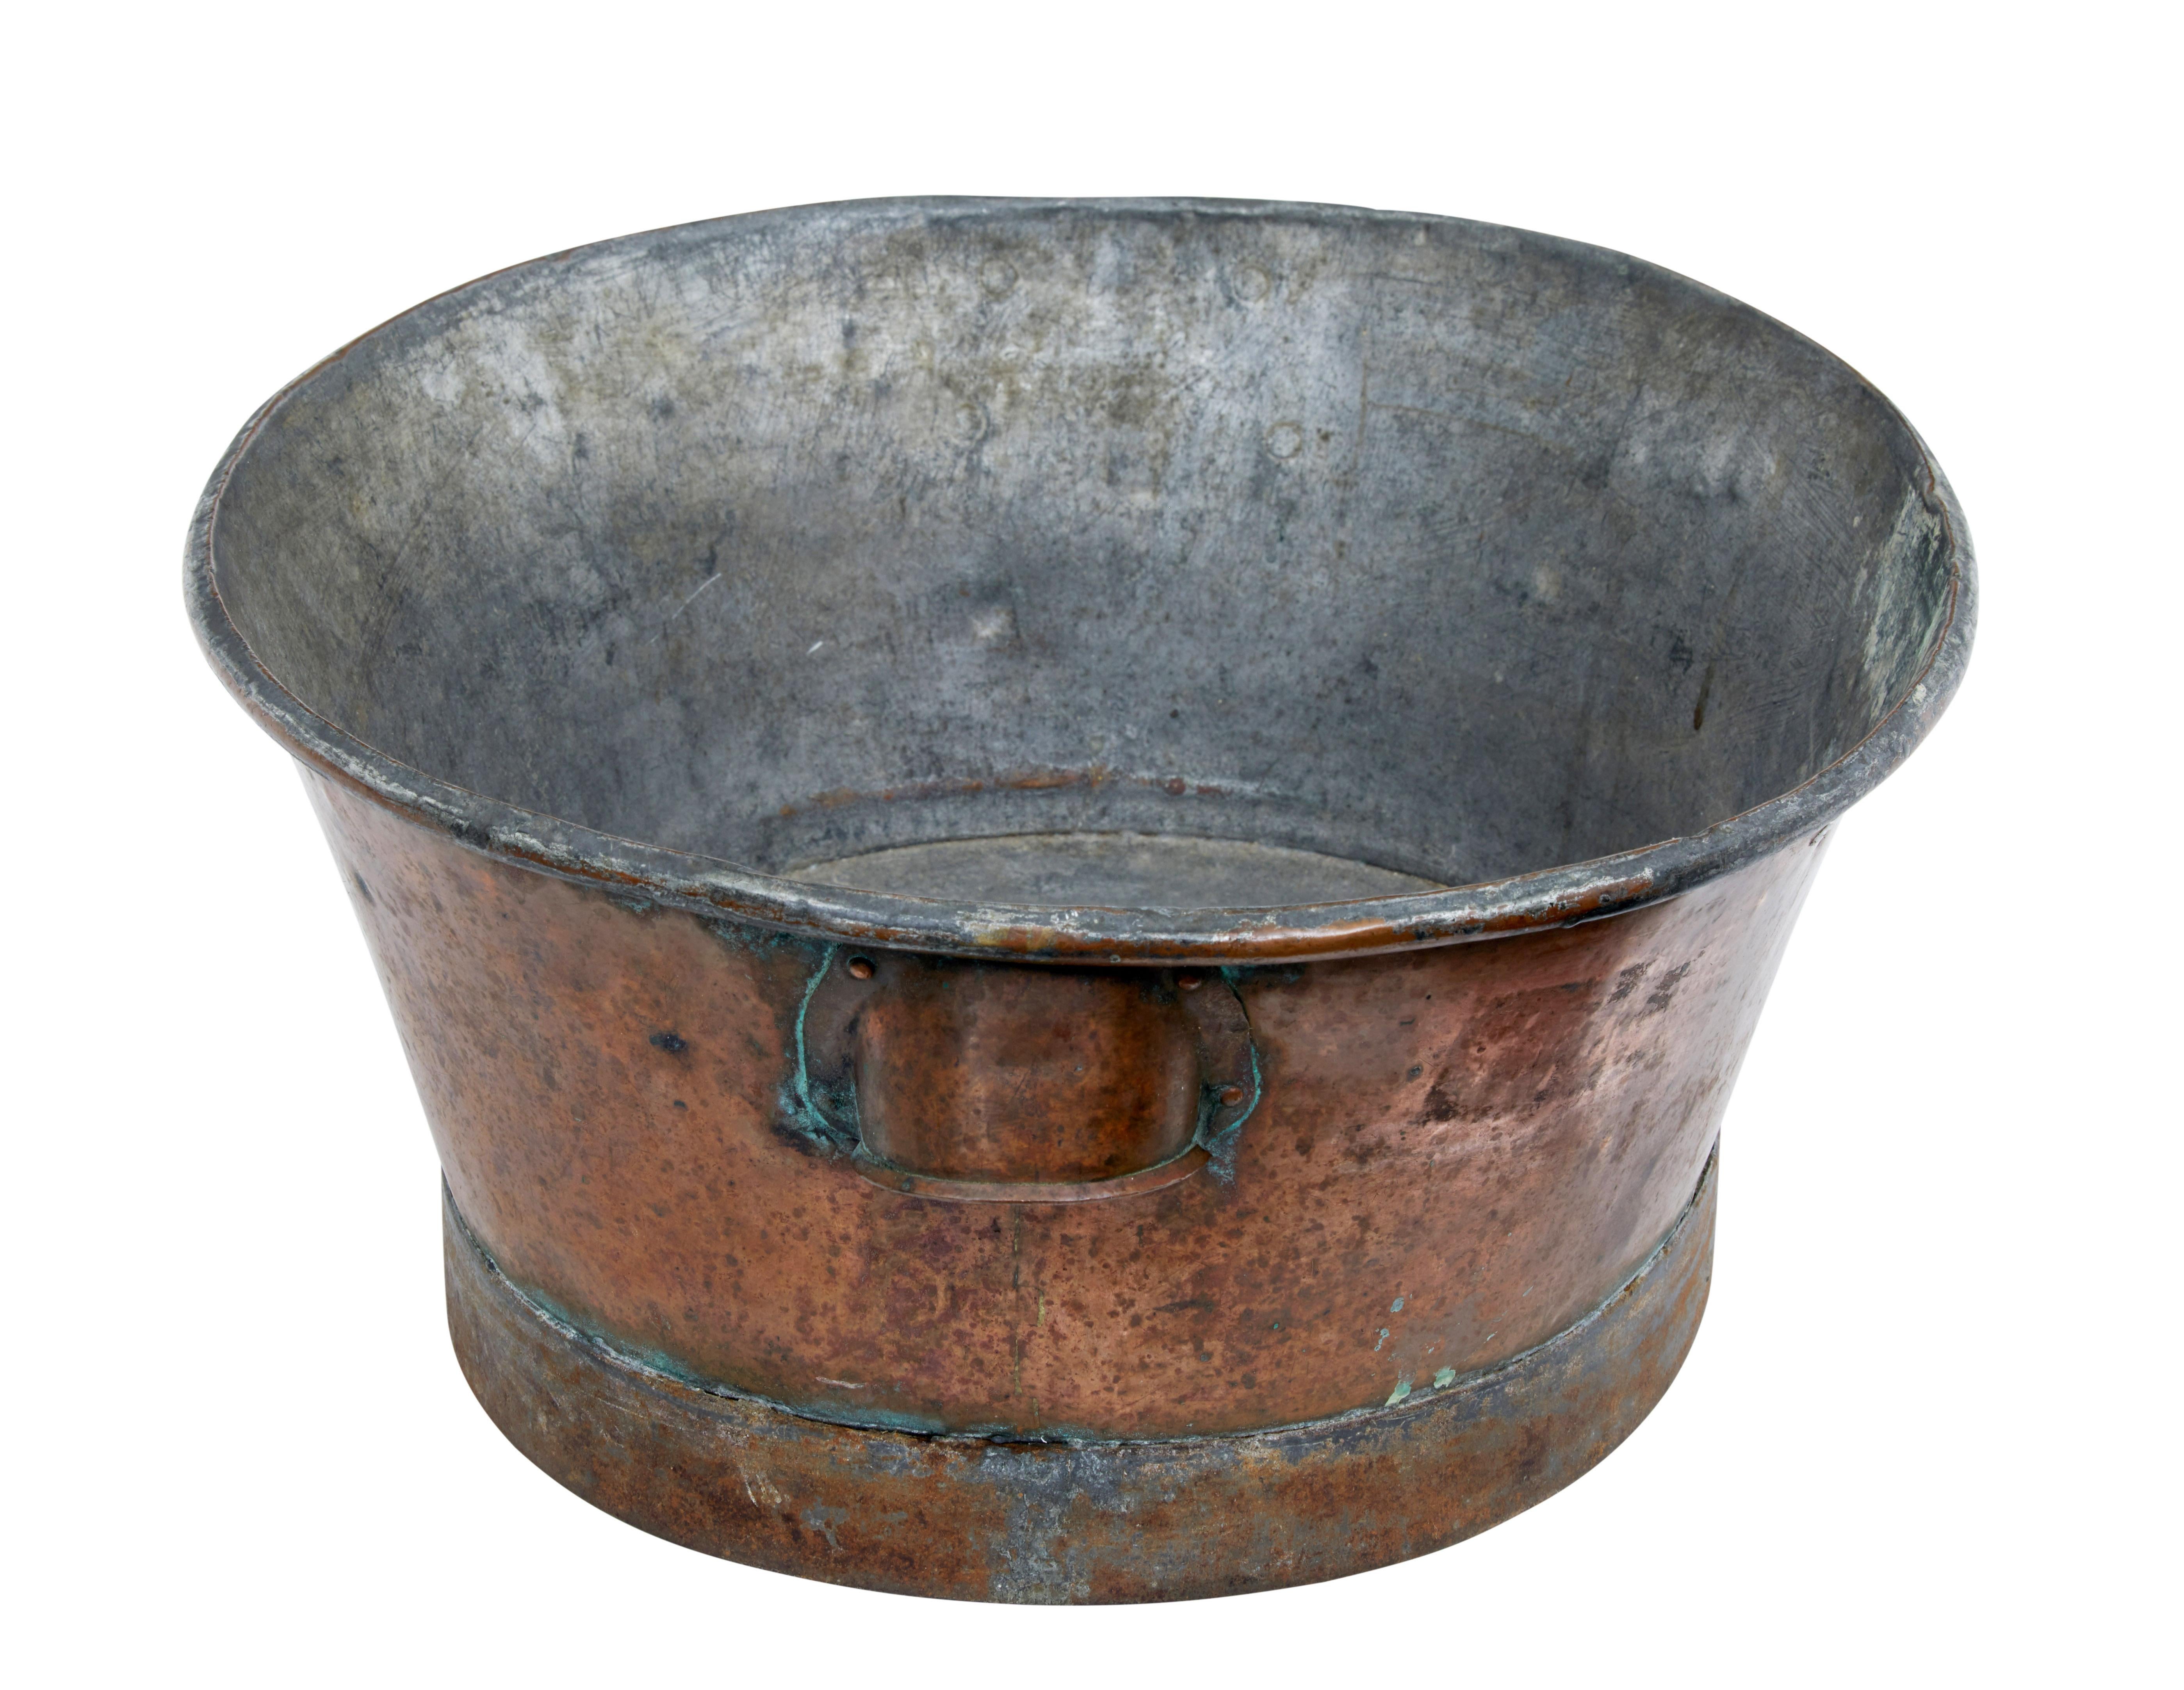 19th century copper vessel, circa 1870.

Oval shaped with a cupped handle each end. Ideal for many uses today, such as a herb planter, small dog basket or for decorative use.

Obvious signs of use with surface marks.